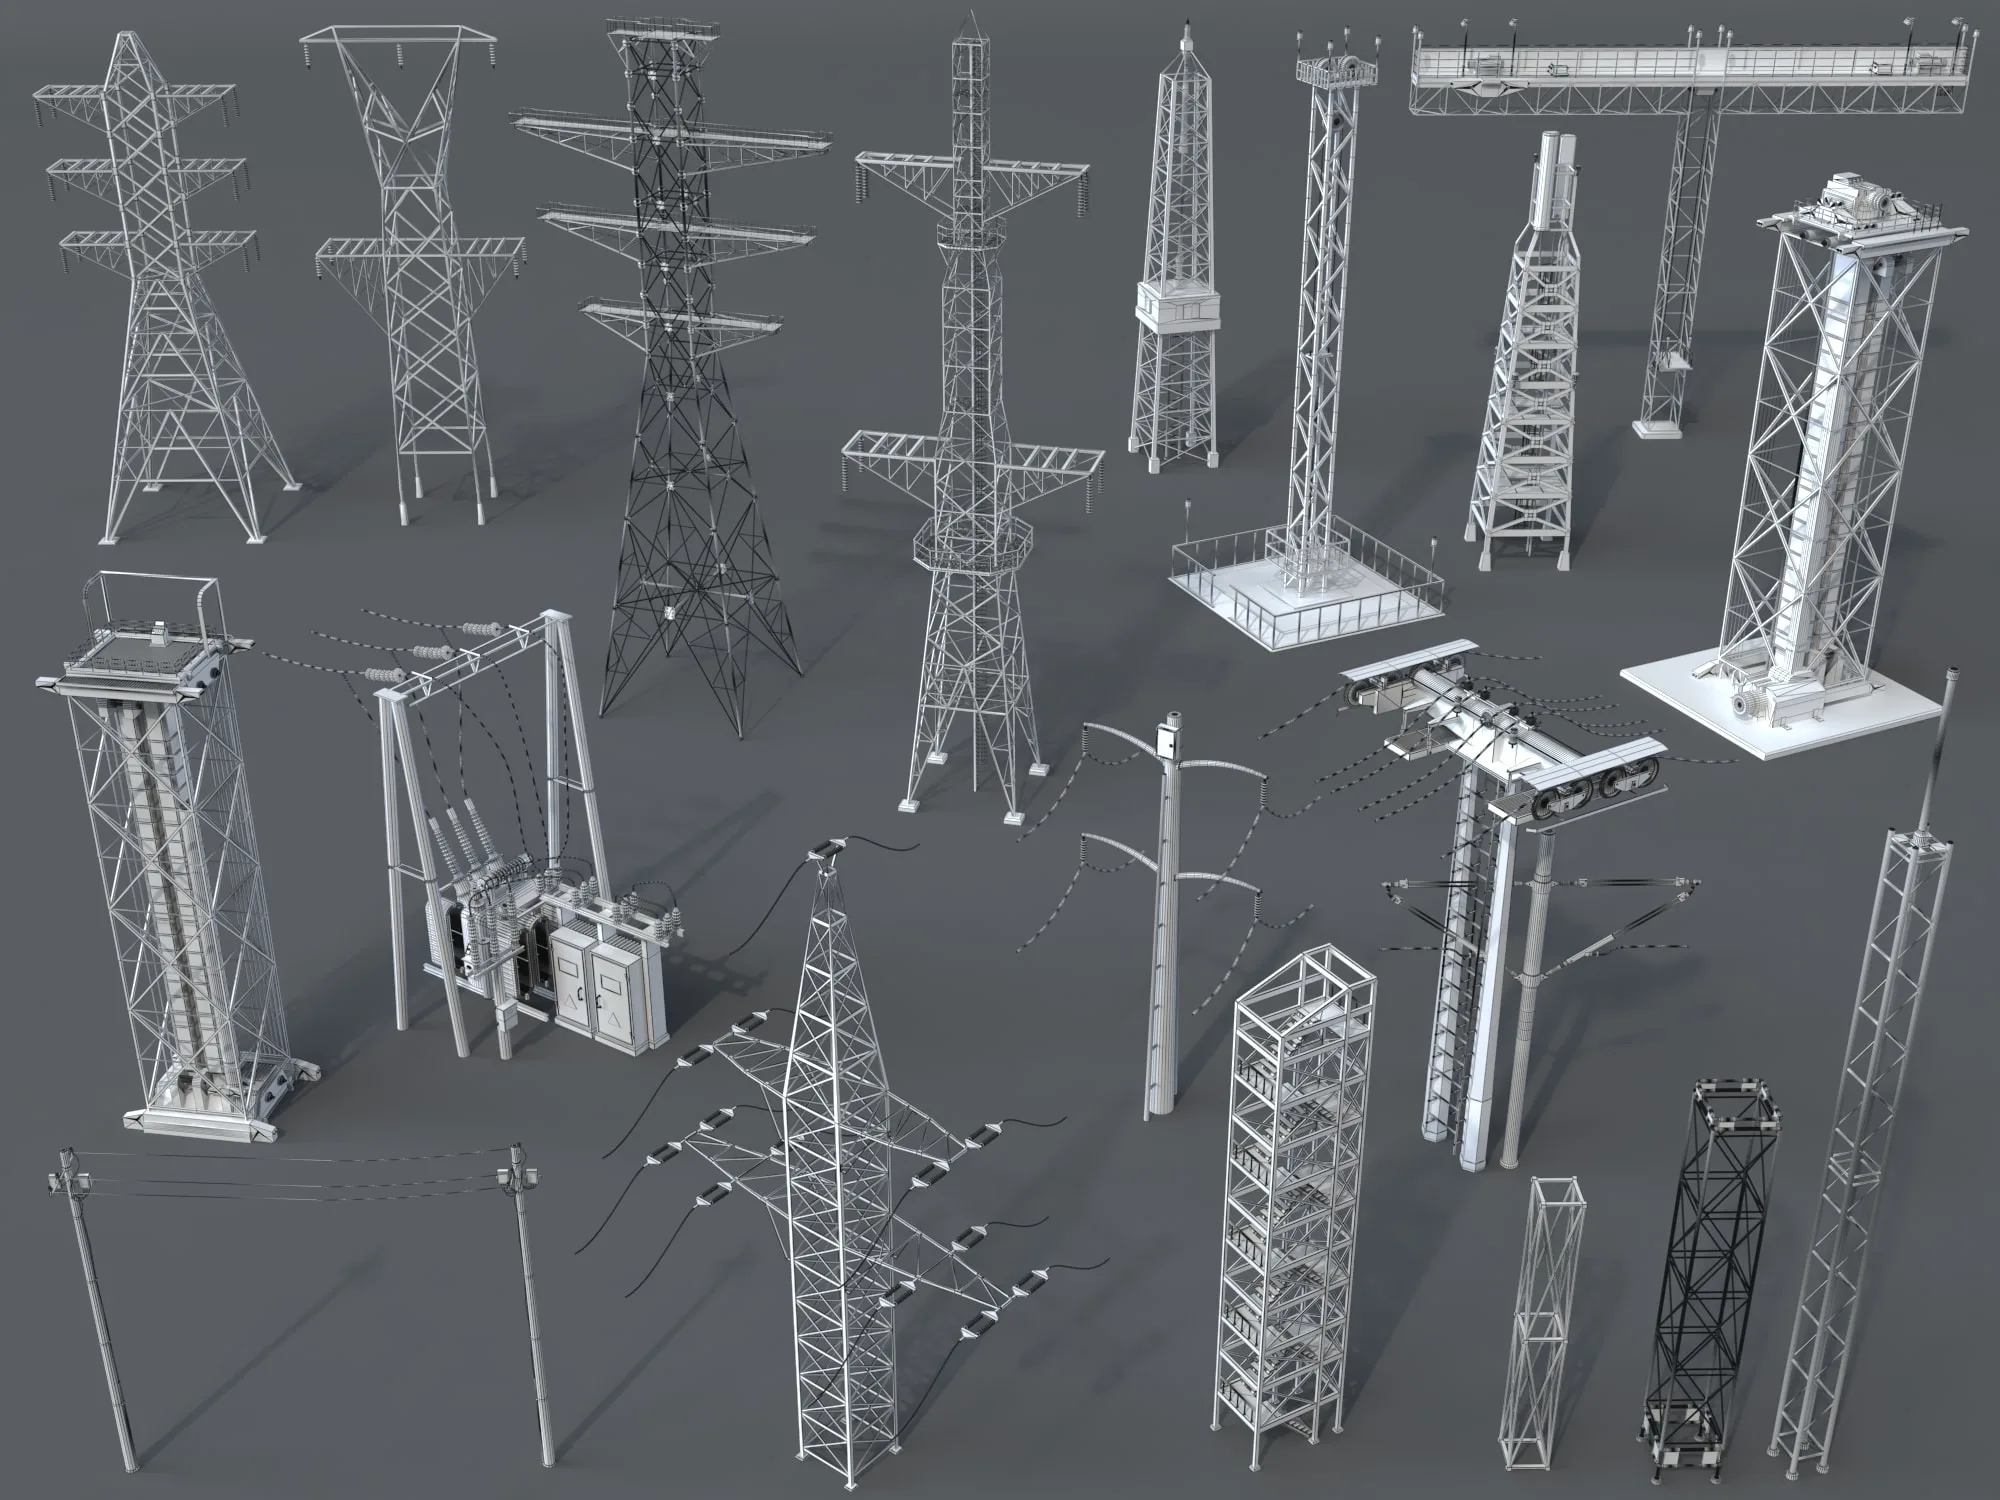 Electric Towers - 20 pieces